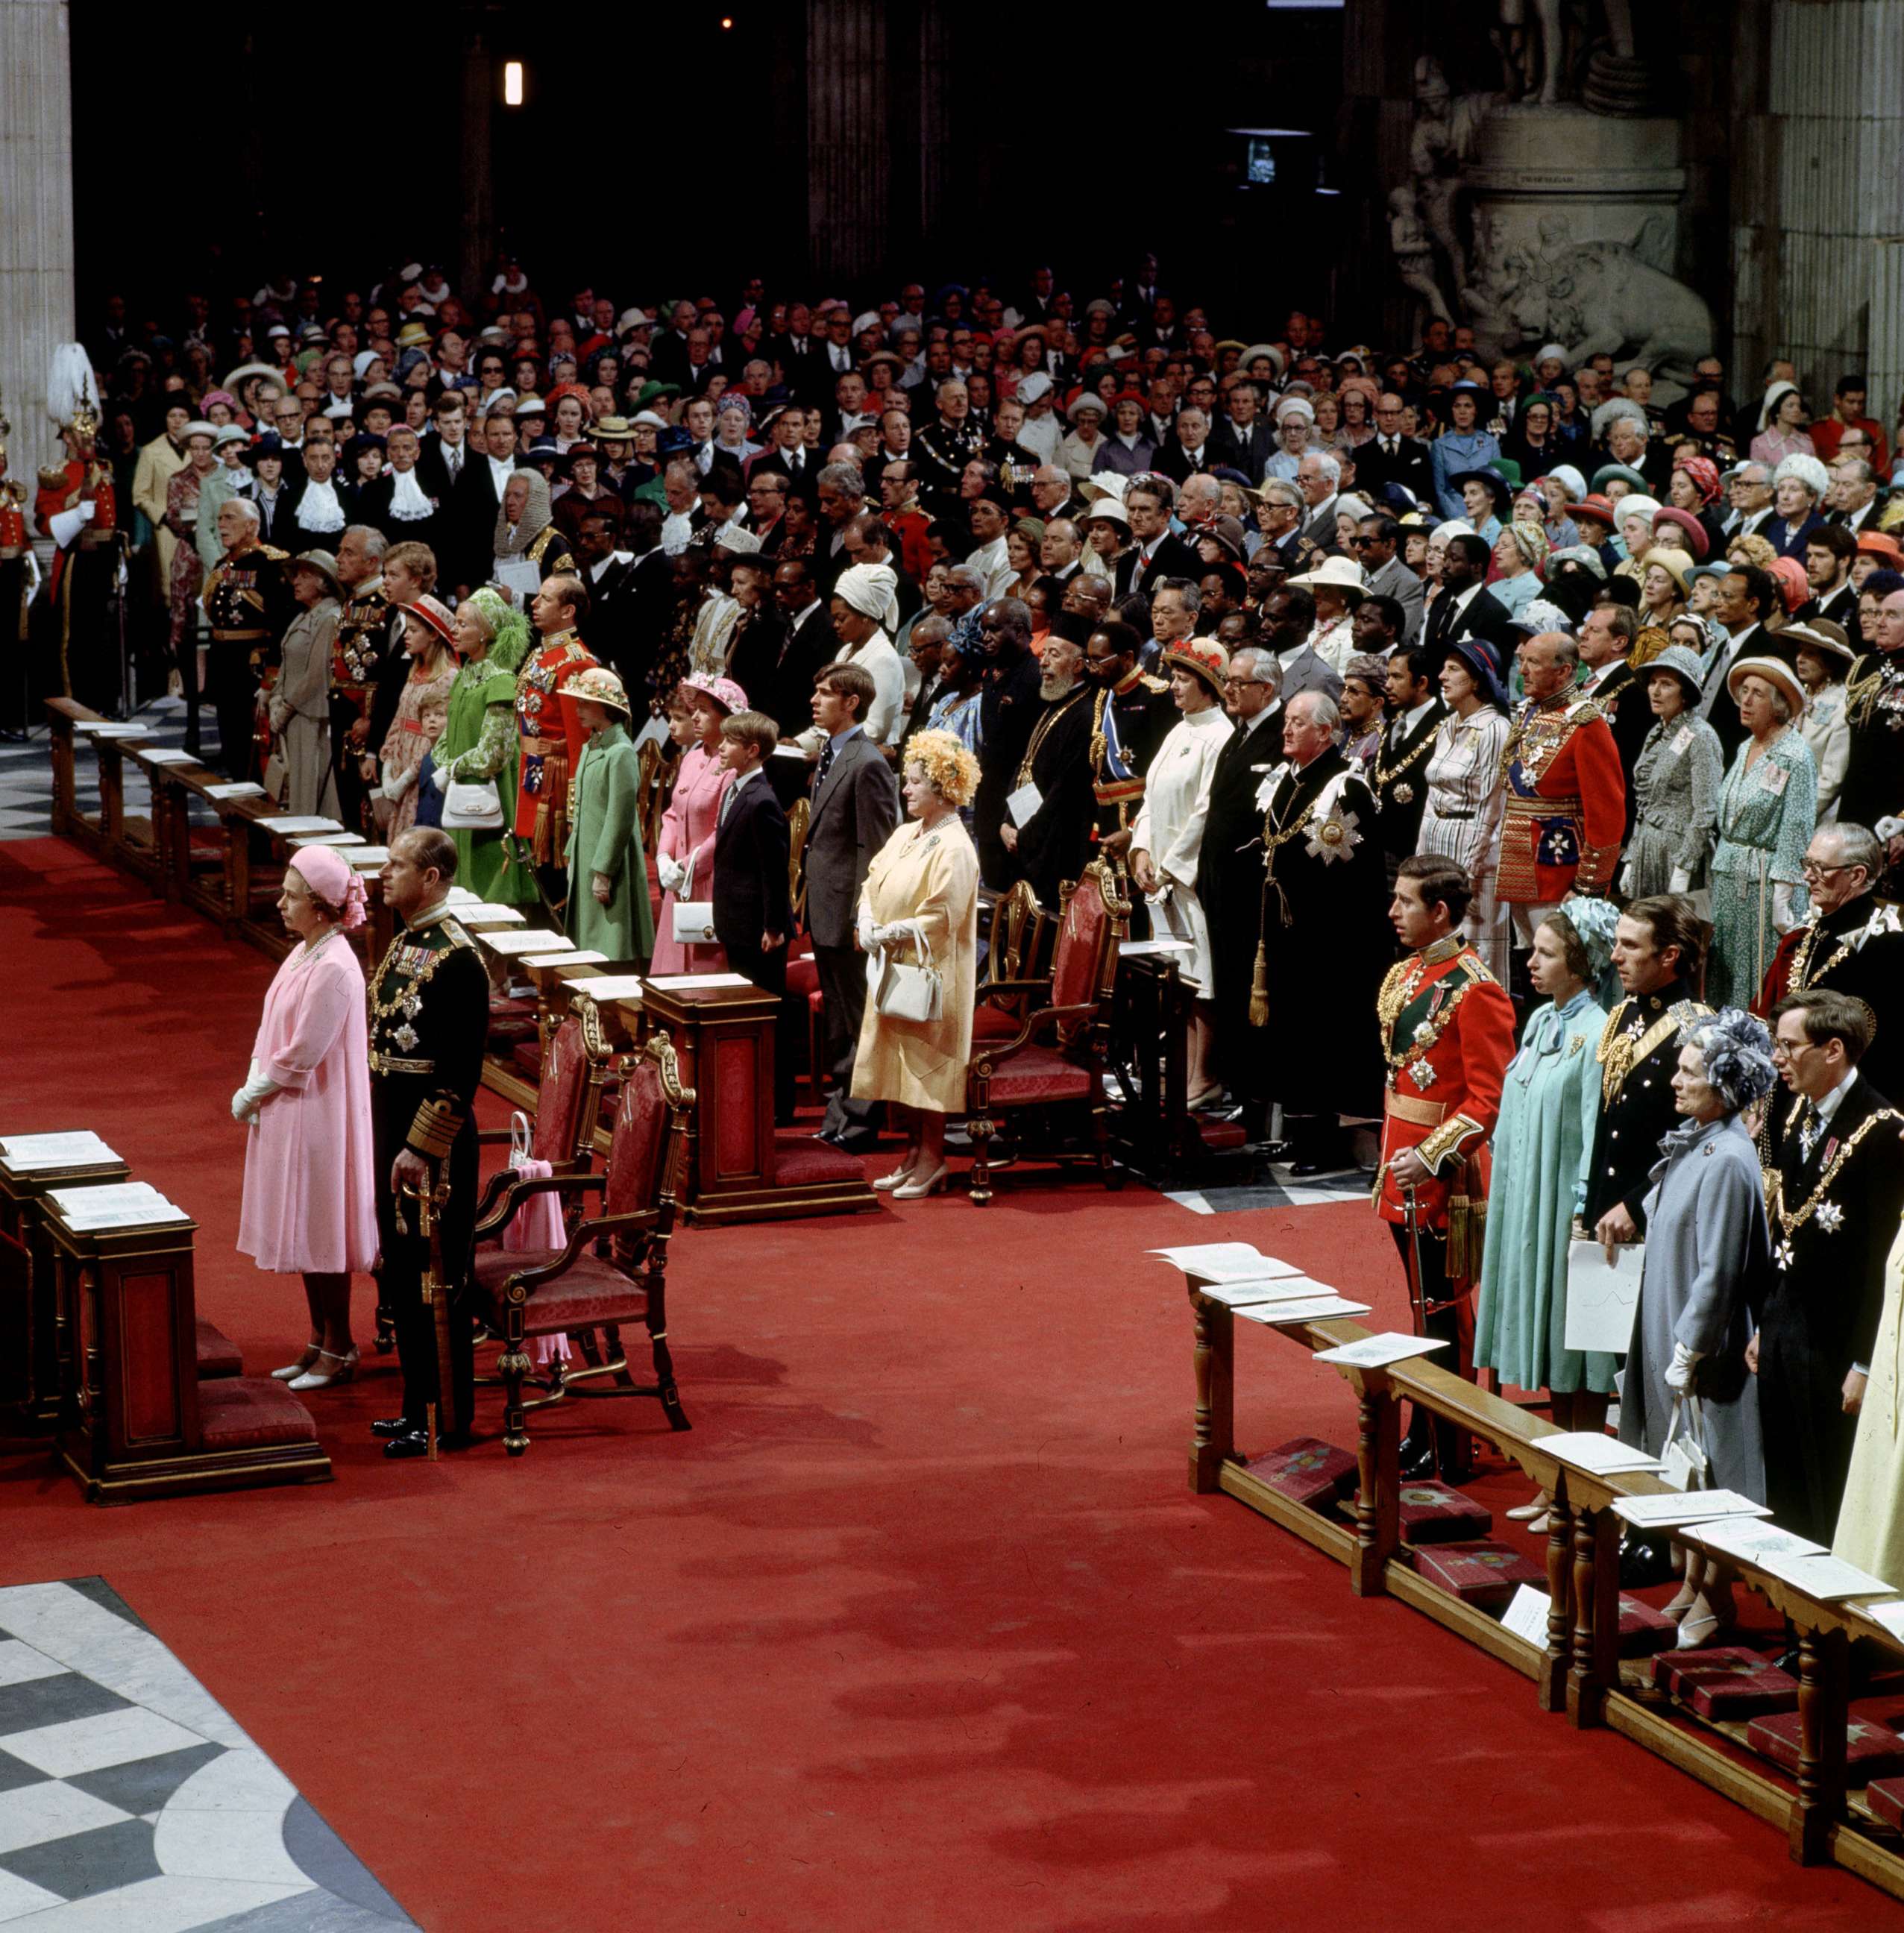 PHOTO: Queen Elizabeth II and Prince Philip with other members of the royal family in St Paul's Cathedral during celebrations for the Queen's Silver Jubilee, June 7, 1977. 